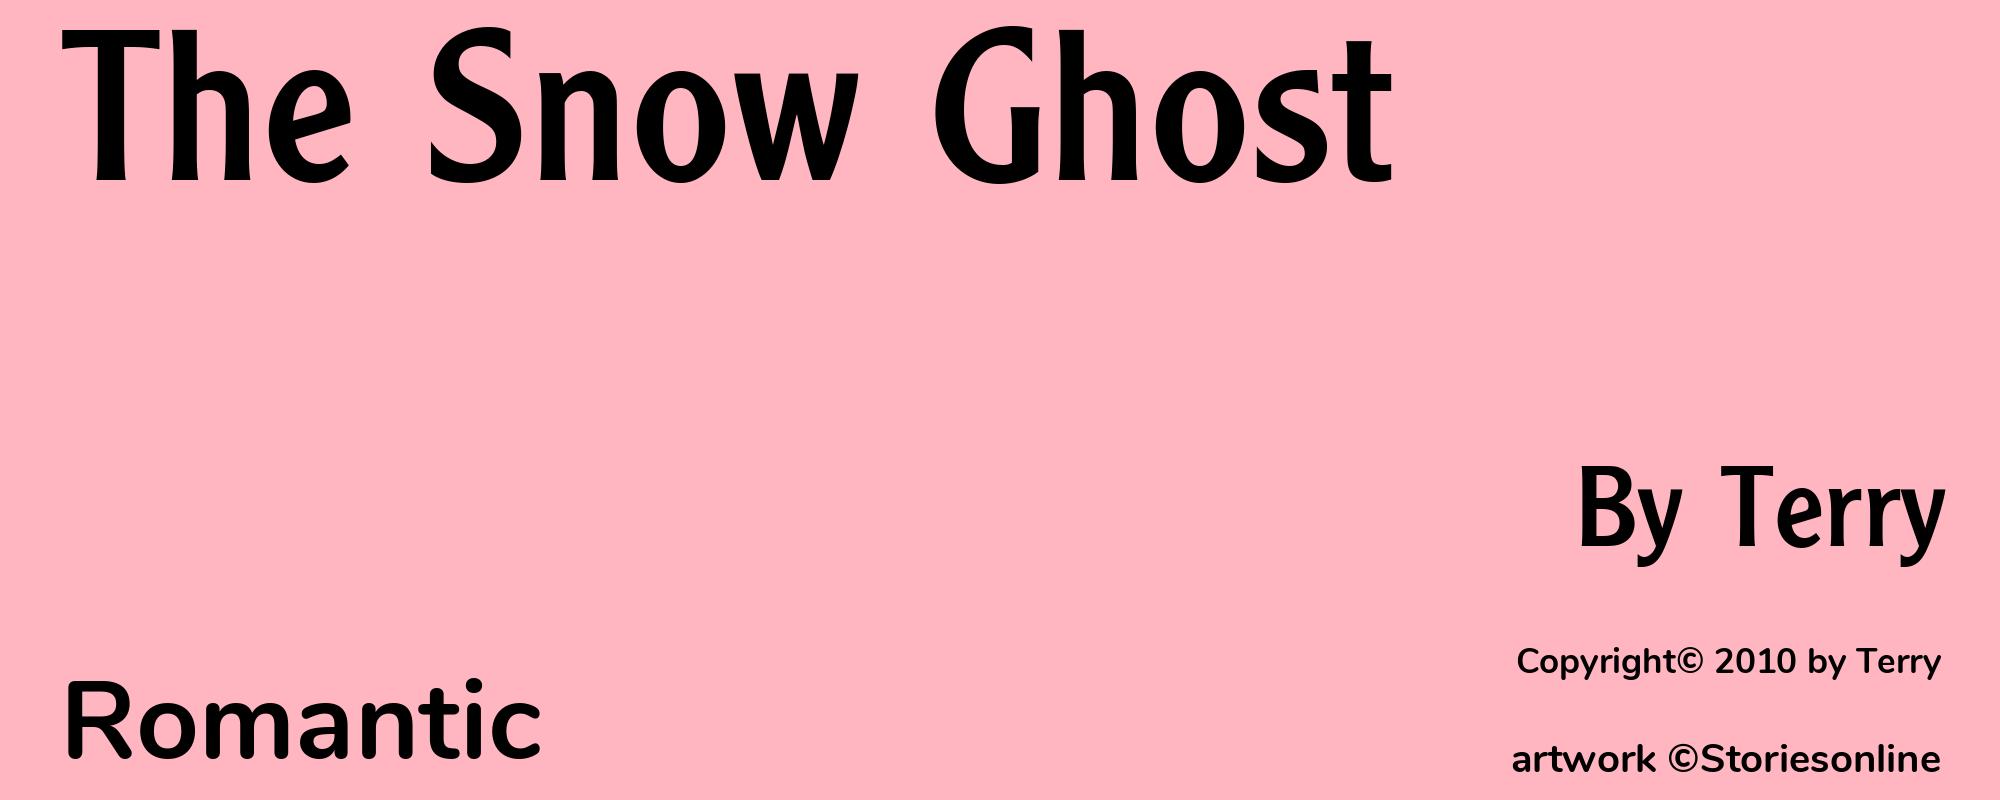 The Snow Ghost - Cover